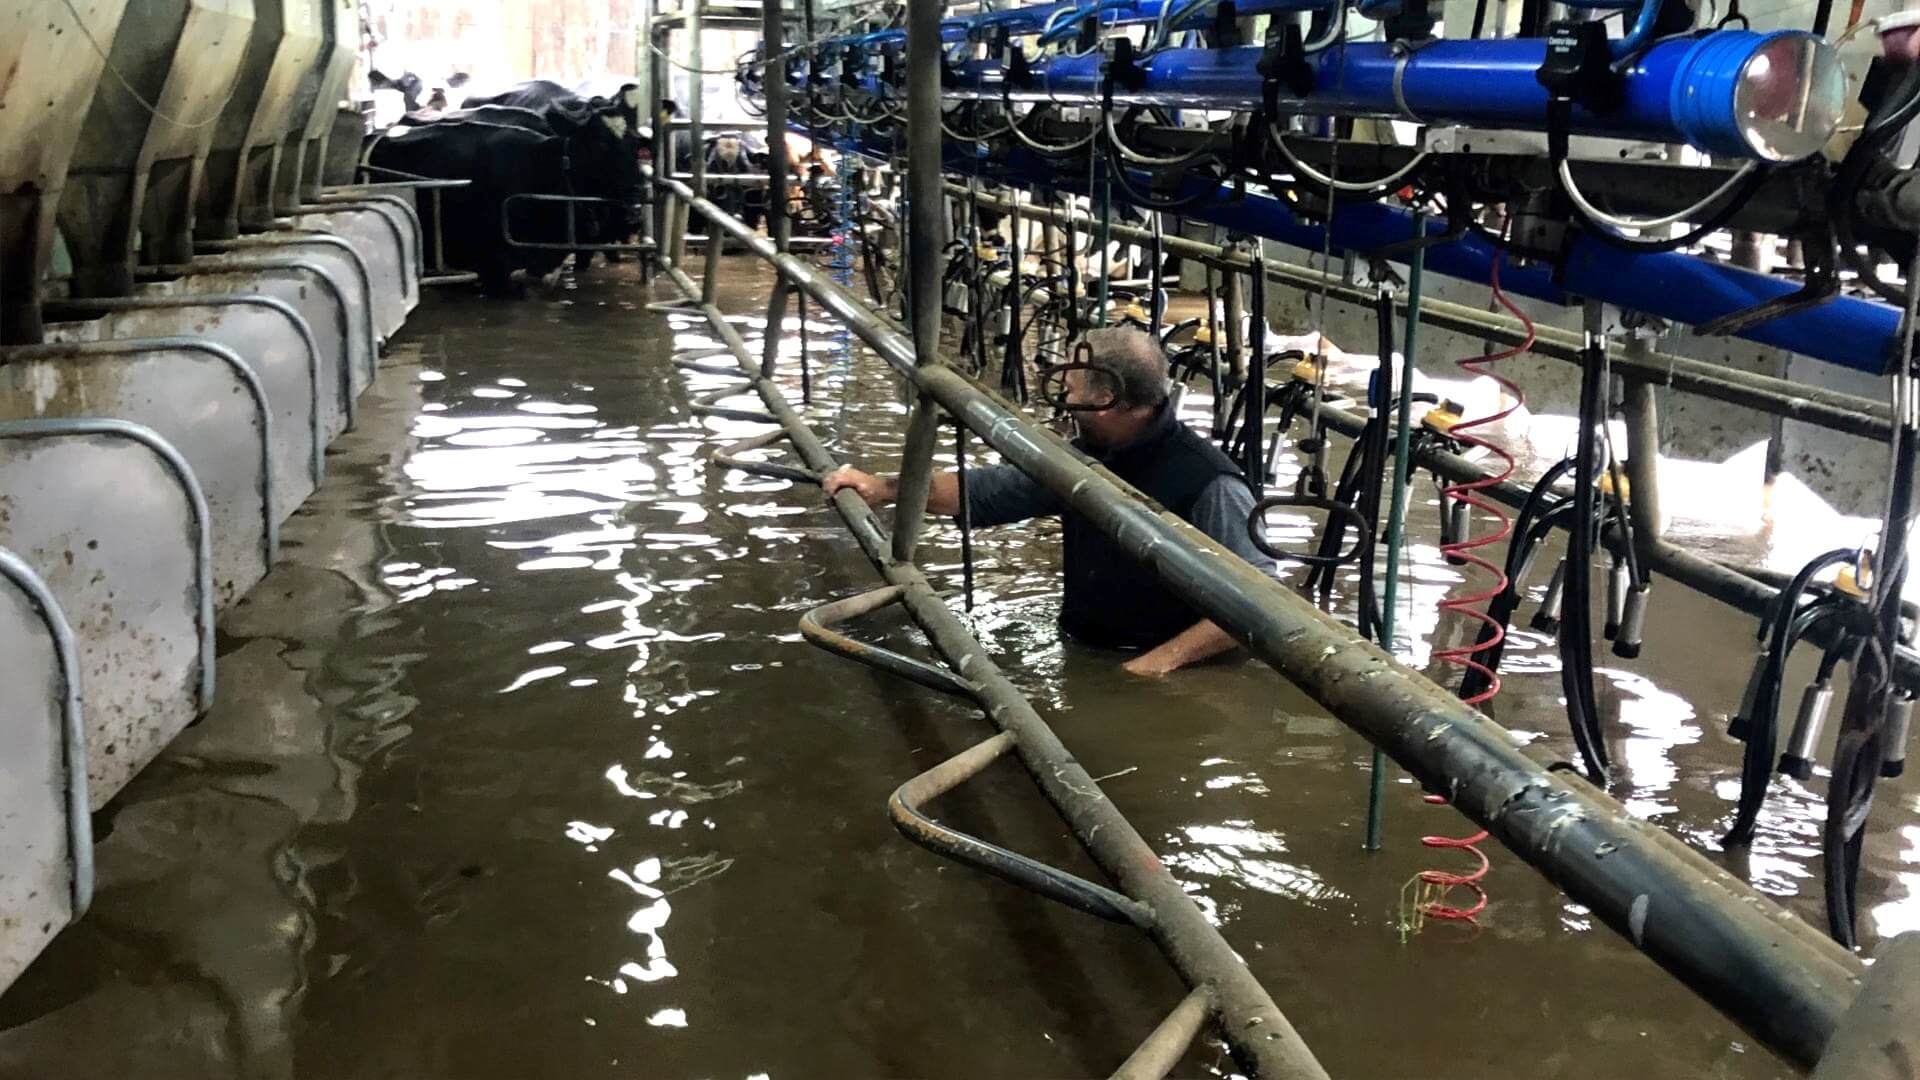 Man standing in a dairy shed with pumps that milk the cows. He has flood waters up to his waist